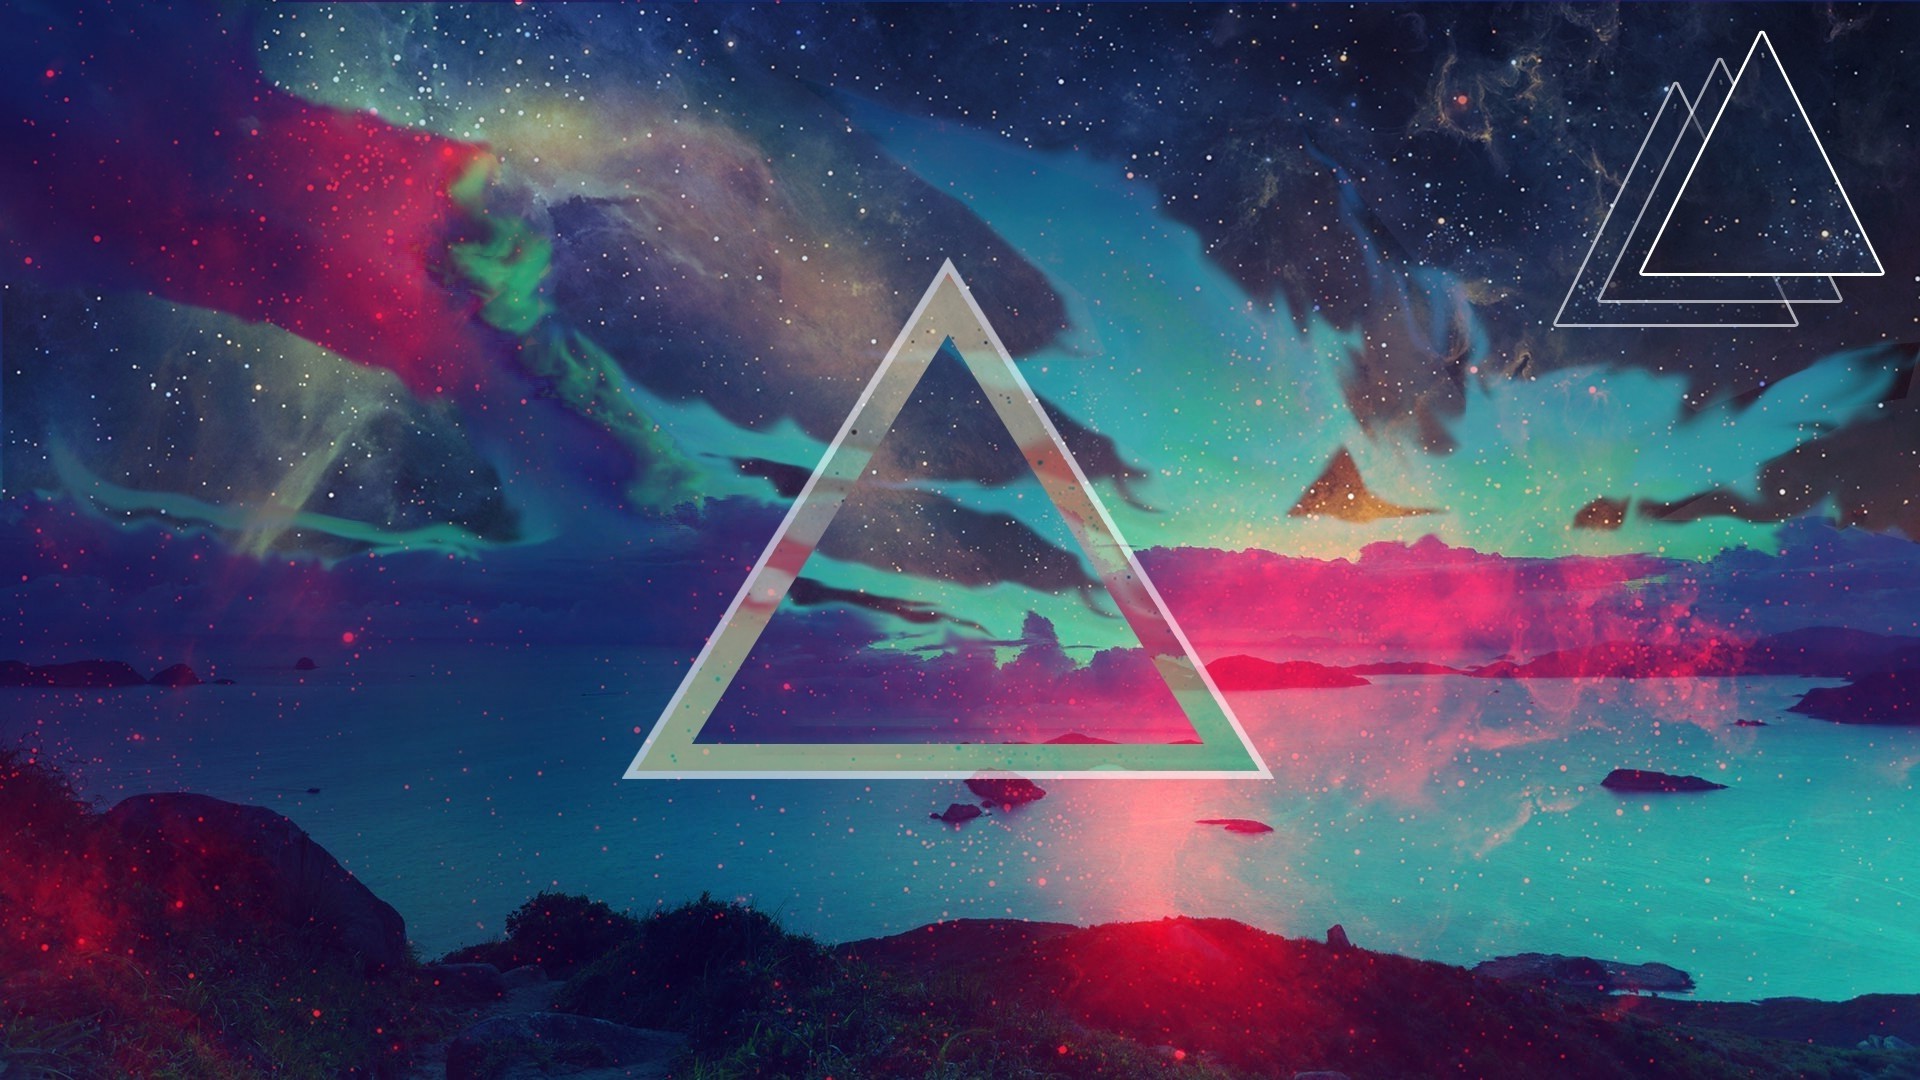 abstract triangle wallpaper,sky,pyramid,triangle,space,atmosphere